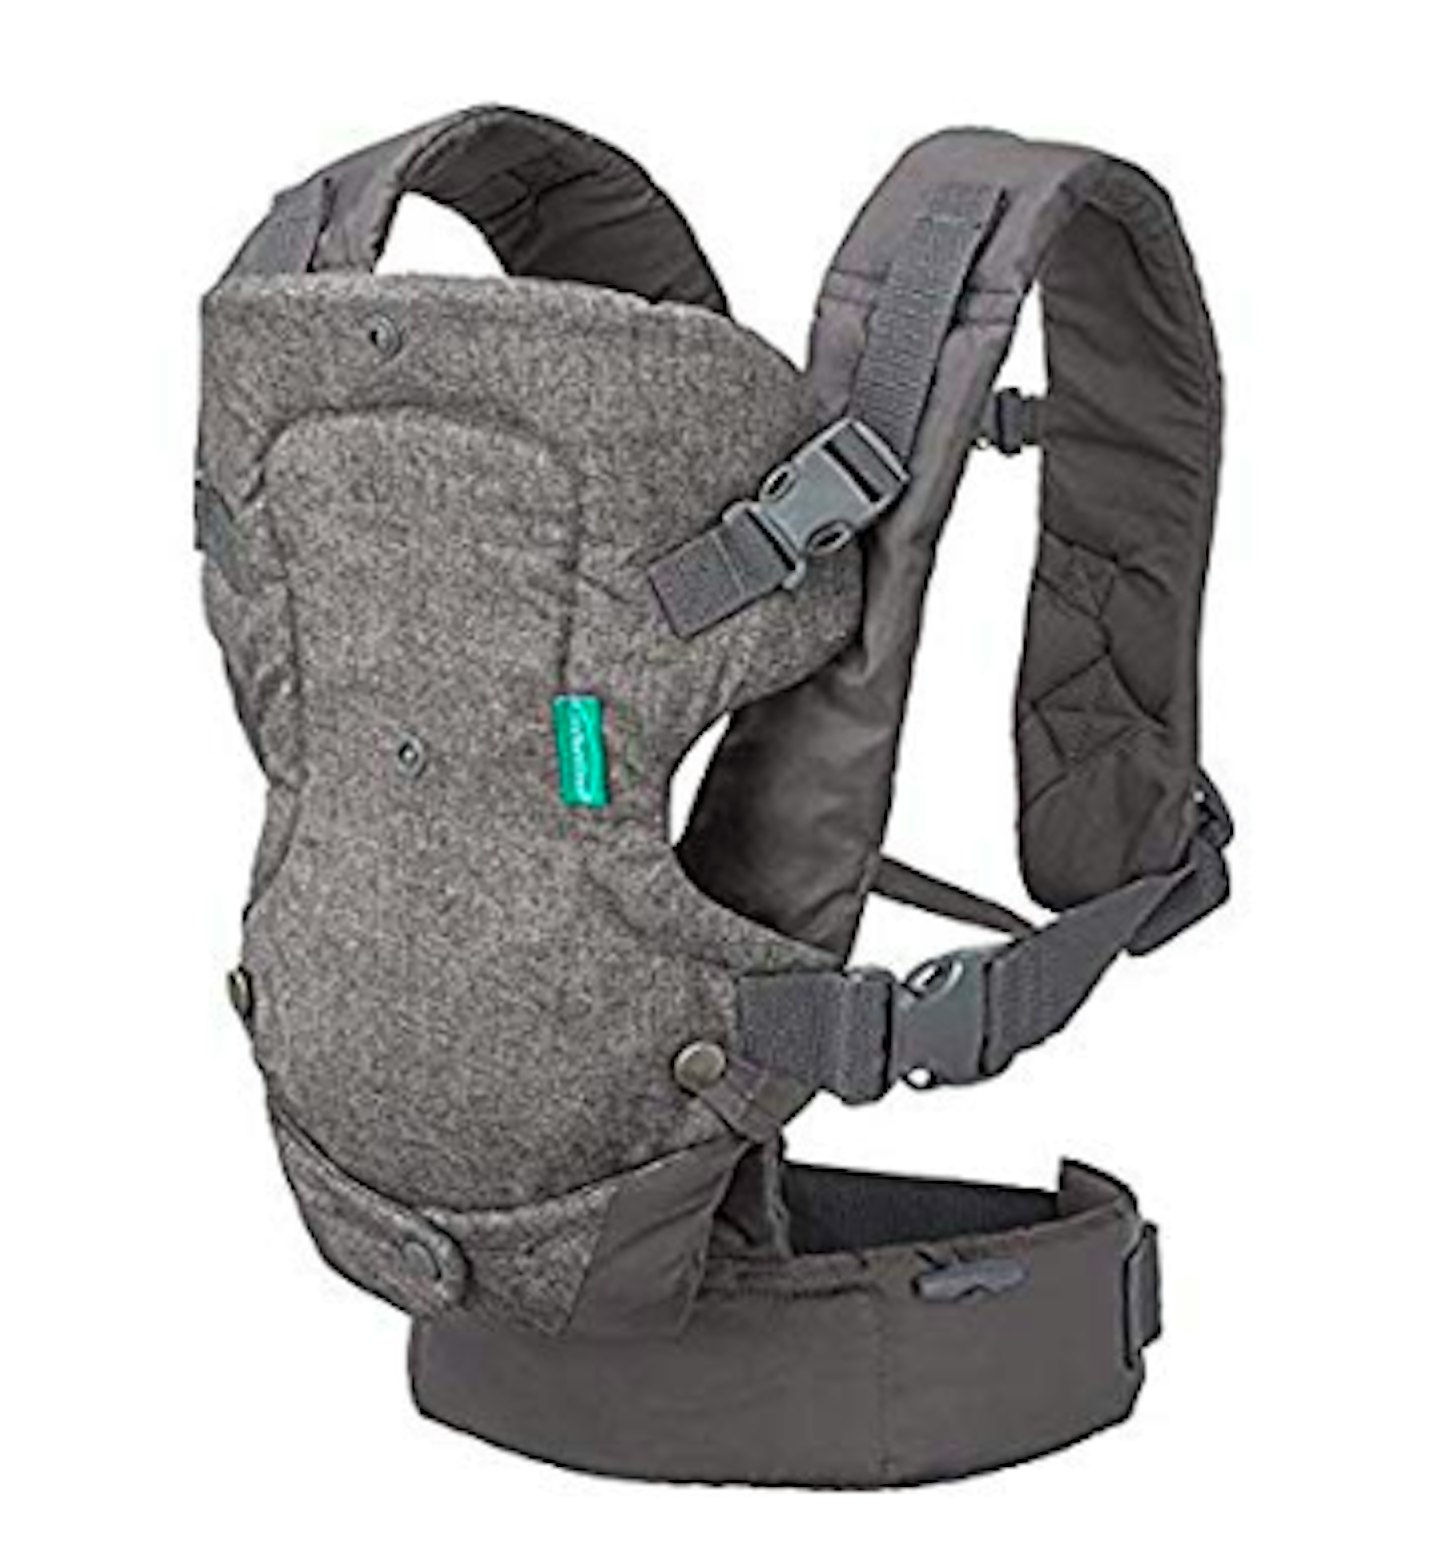 Infantino Flip Advanced 4-in-1 Baby Carrier review - Baby carriers